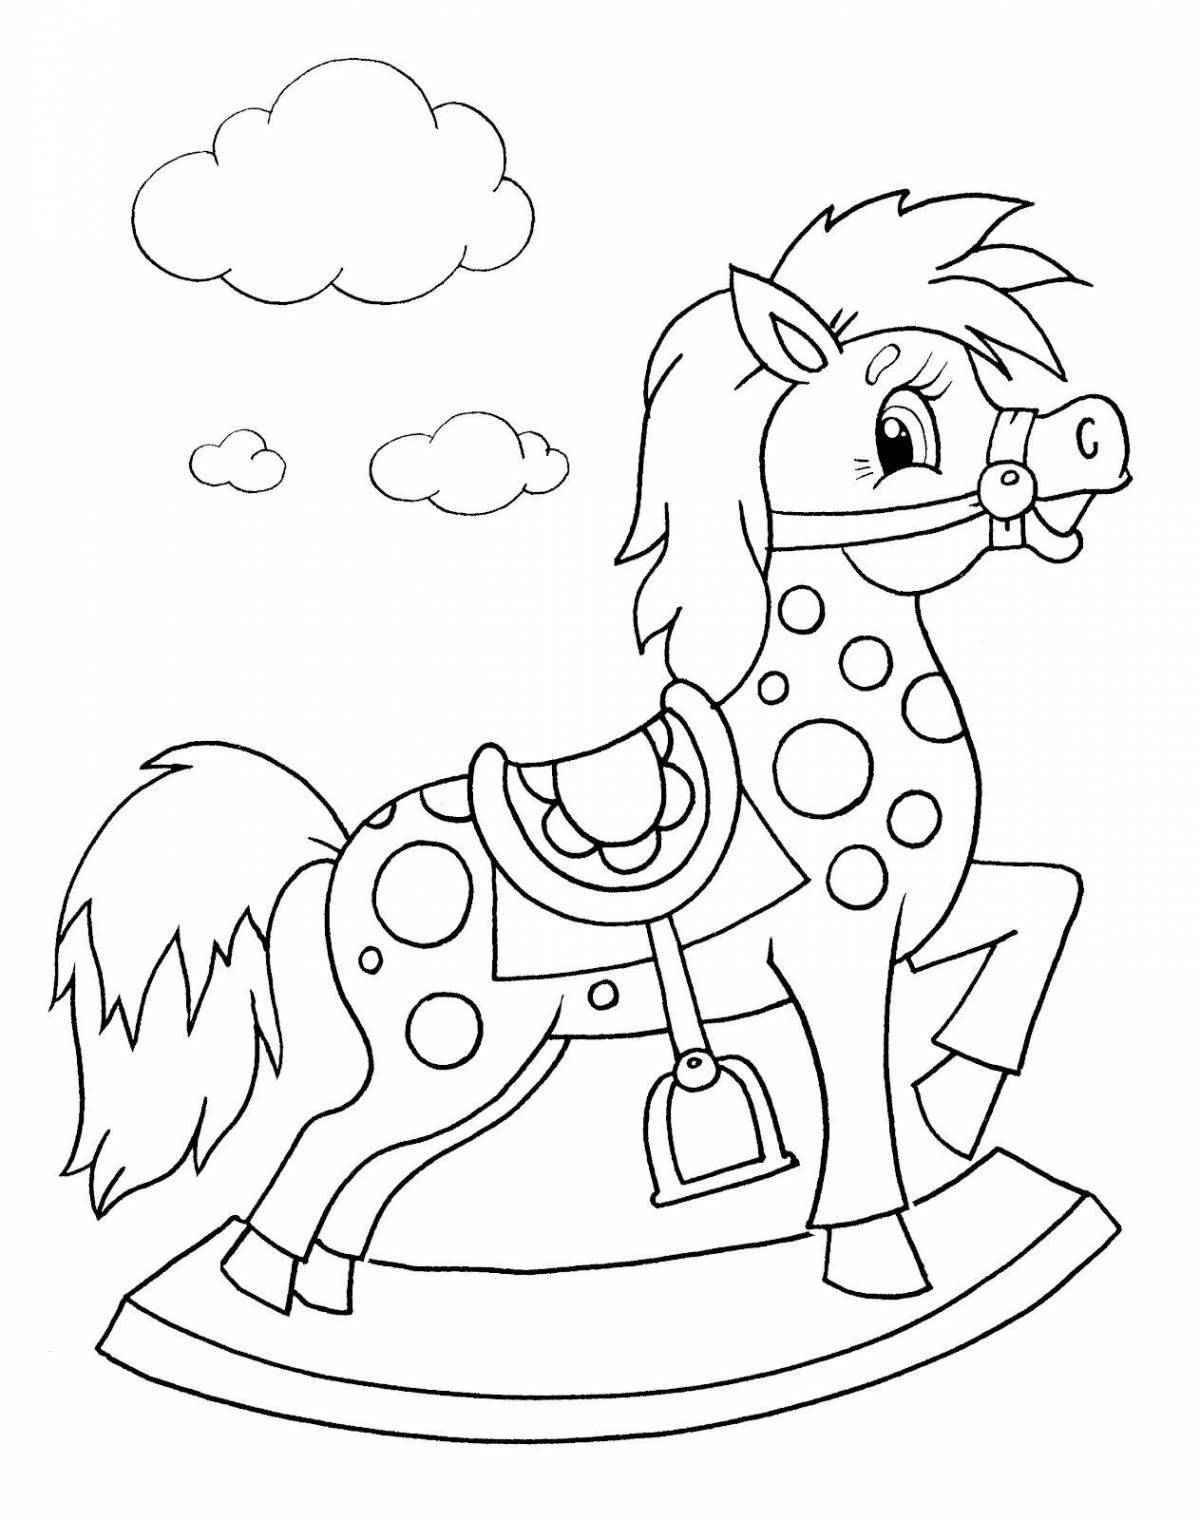 Archive of fun preschool coloring pages